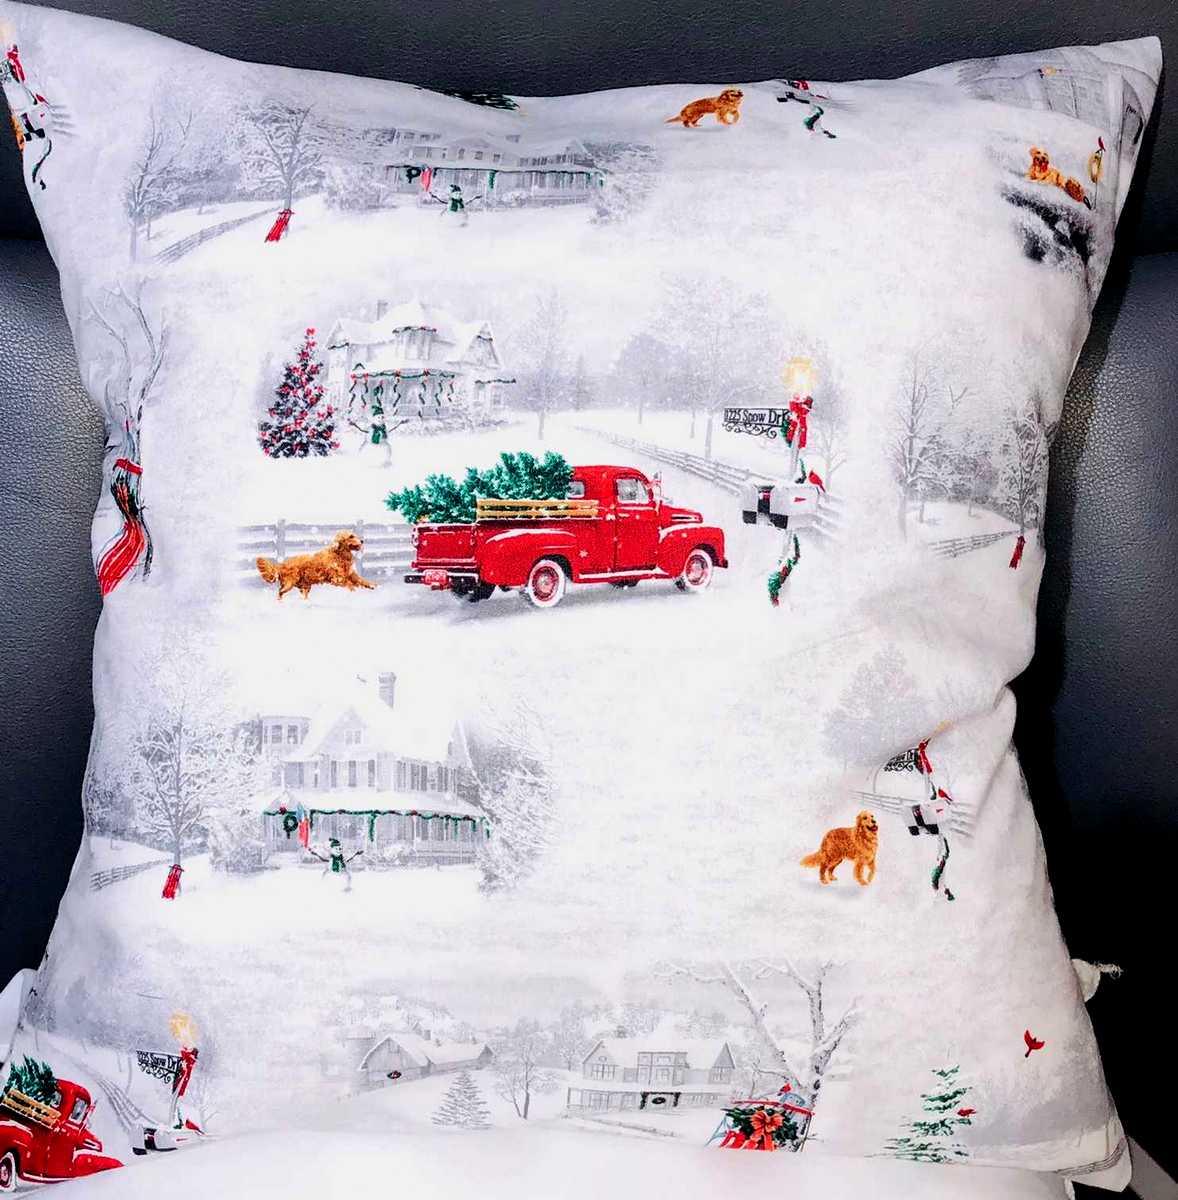 Scenic Winter Snow Country House Red Truck Dog Snowman Holiday Pillow Cover